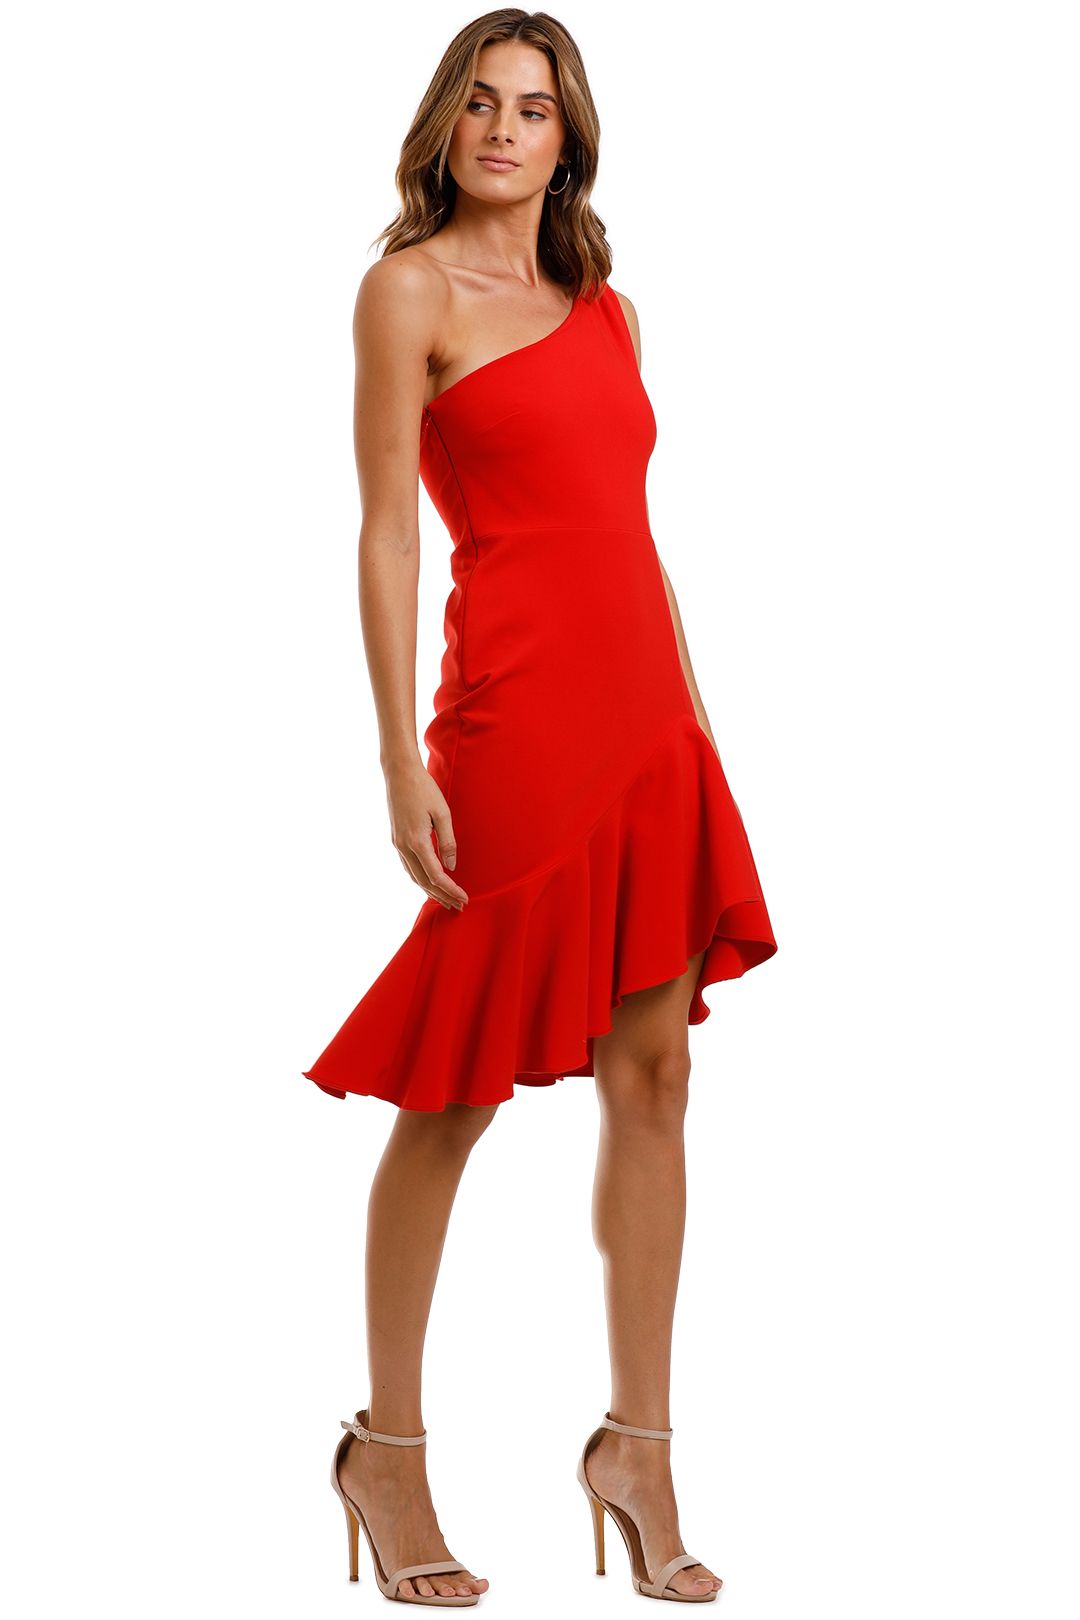 Likely NYC Rollins Dress Red Mini